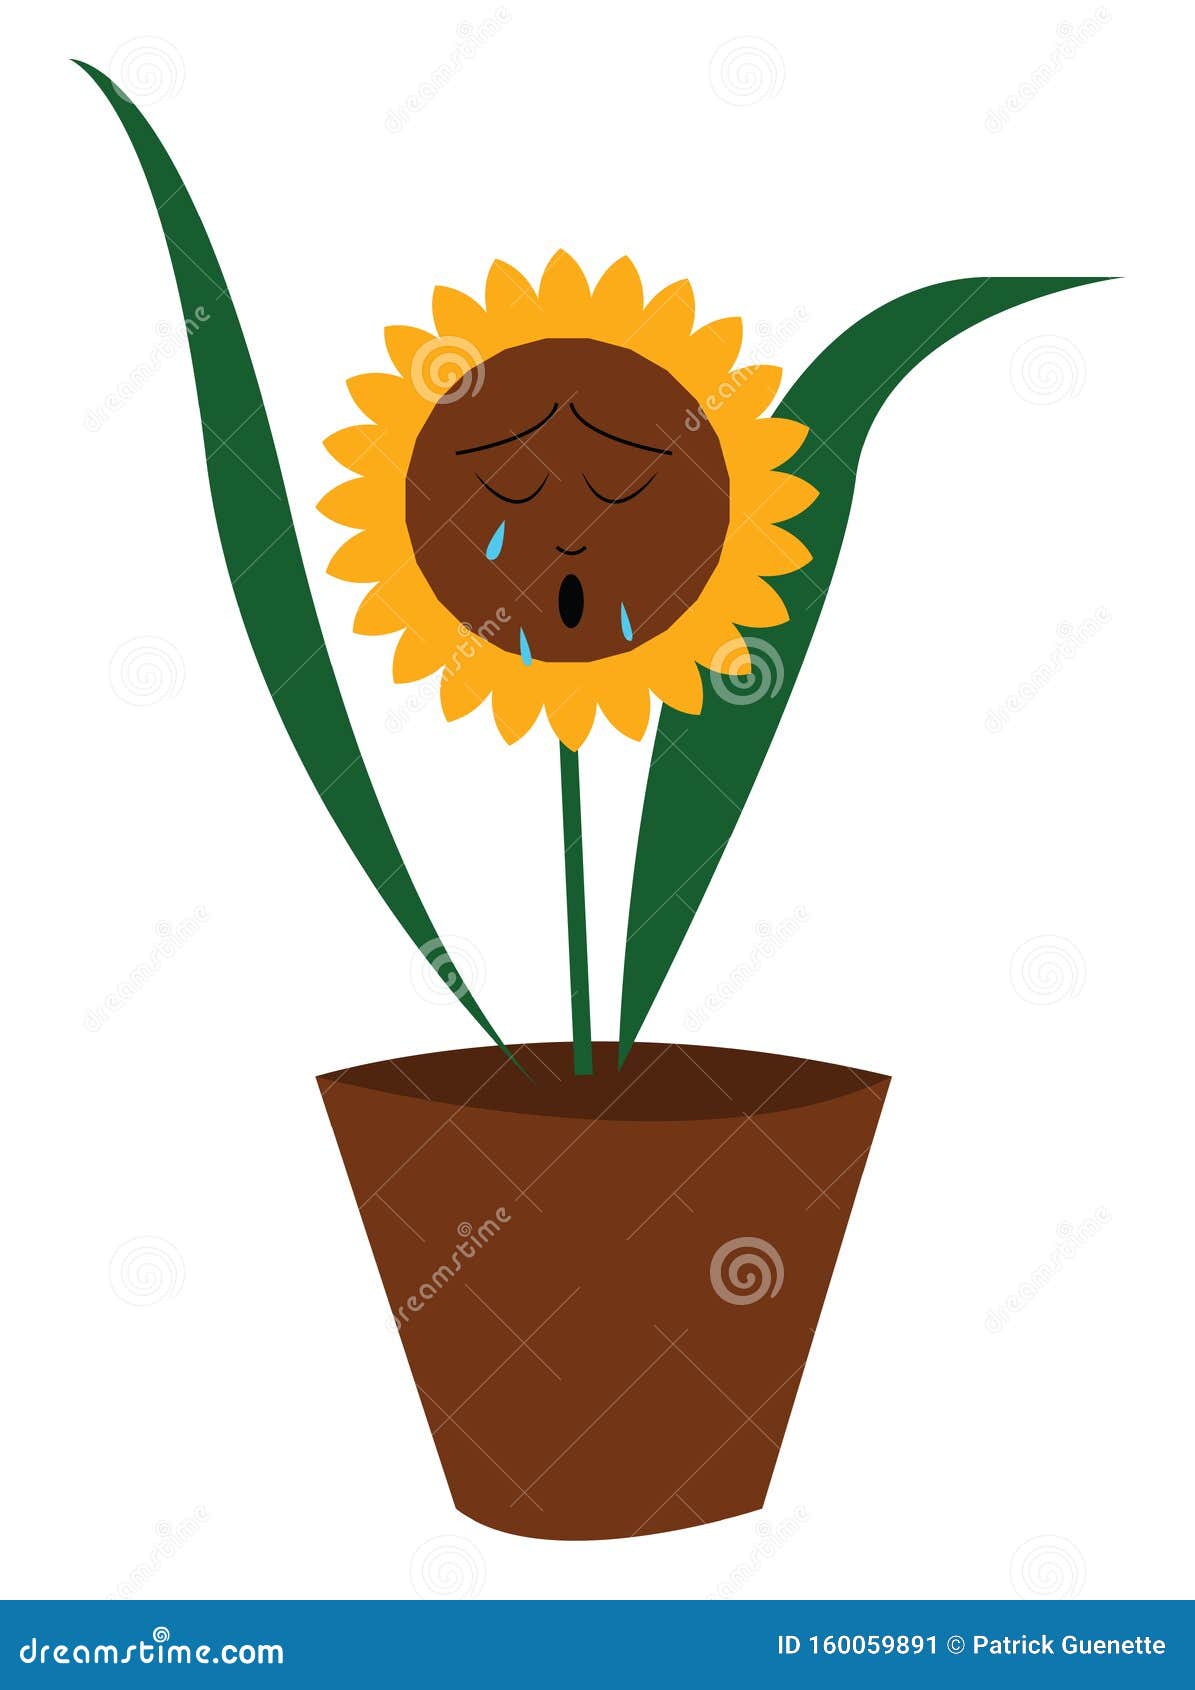 Download Emoji Of A Sunflower Pot Plant With Two Long Leaves ...